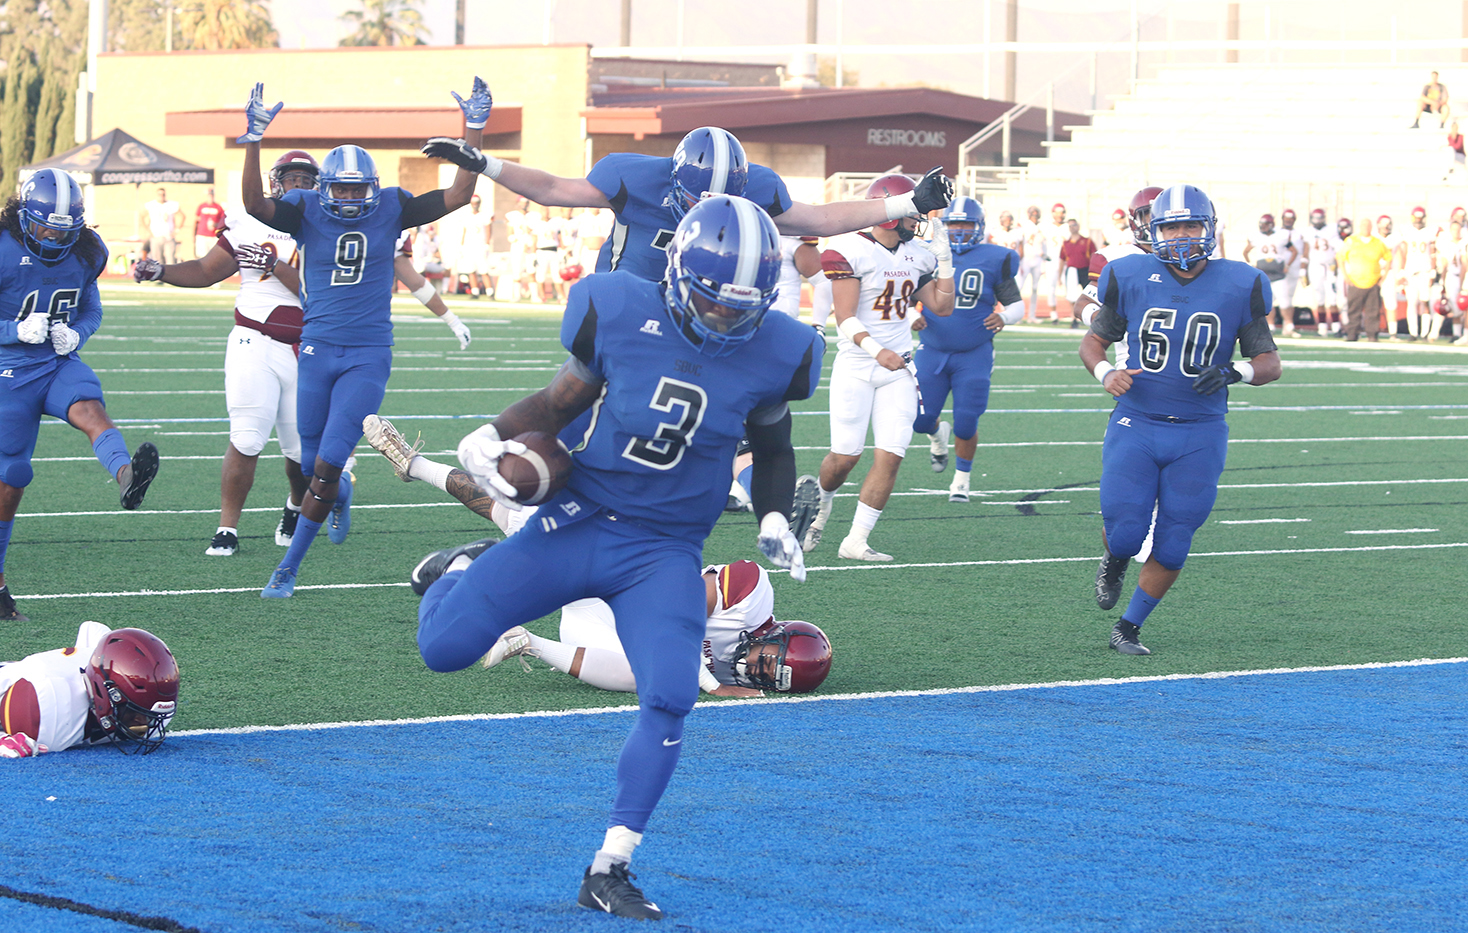 SBVC Honors Past, Looks to Future with Victory over Pasadena